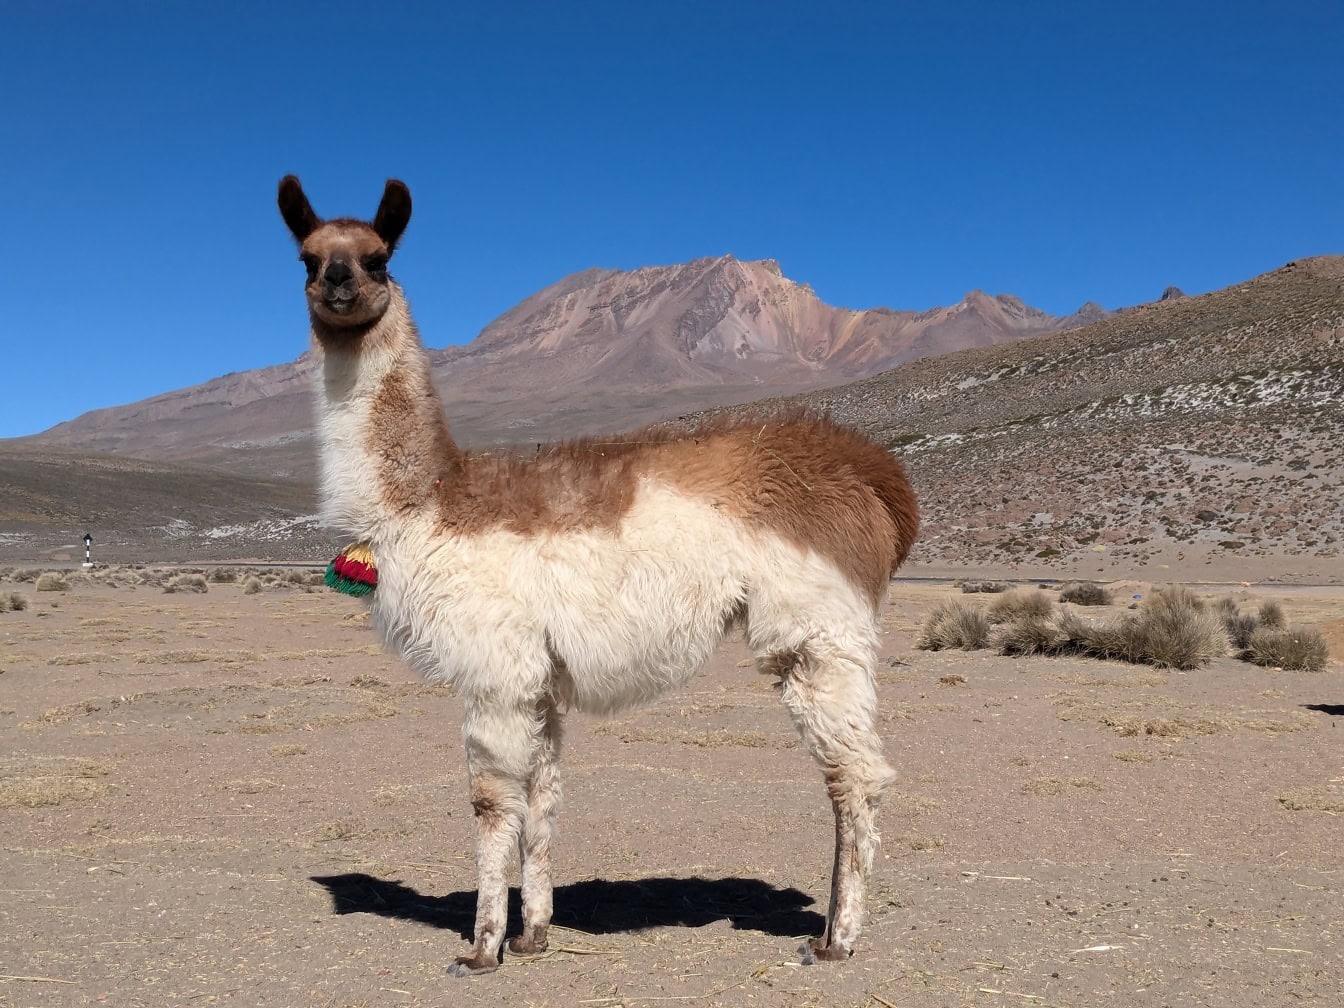 Domesticated Llama standing in a desert in the Andes mountains in Peru